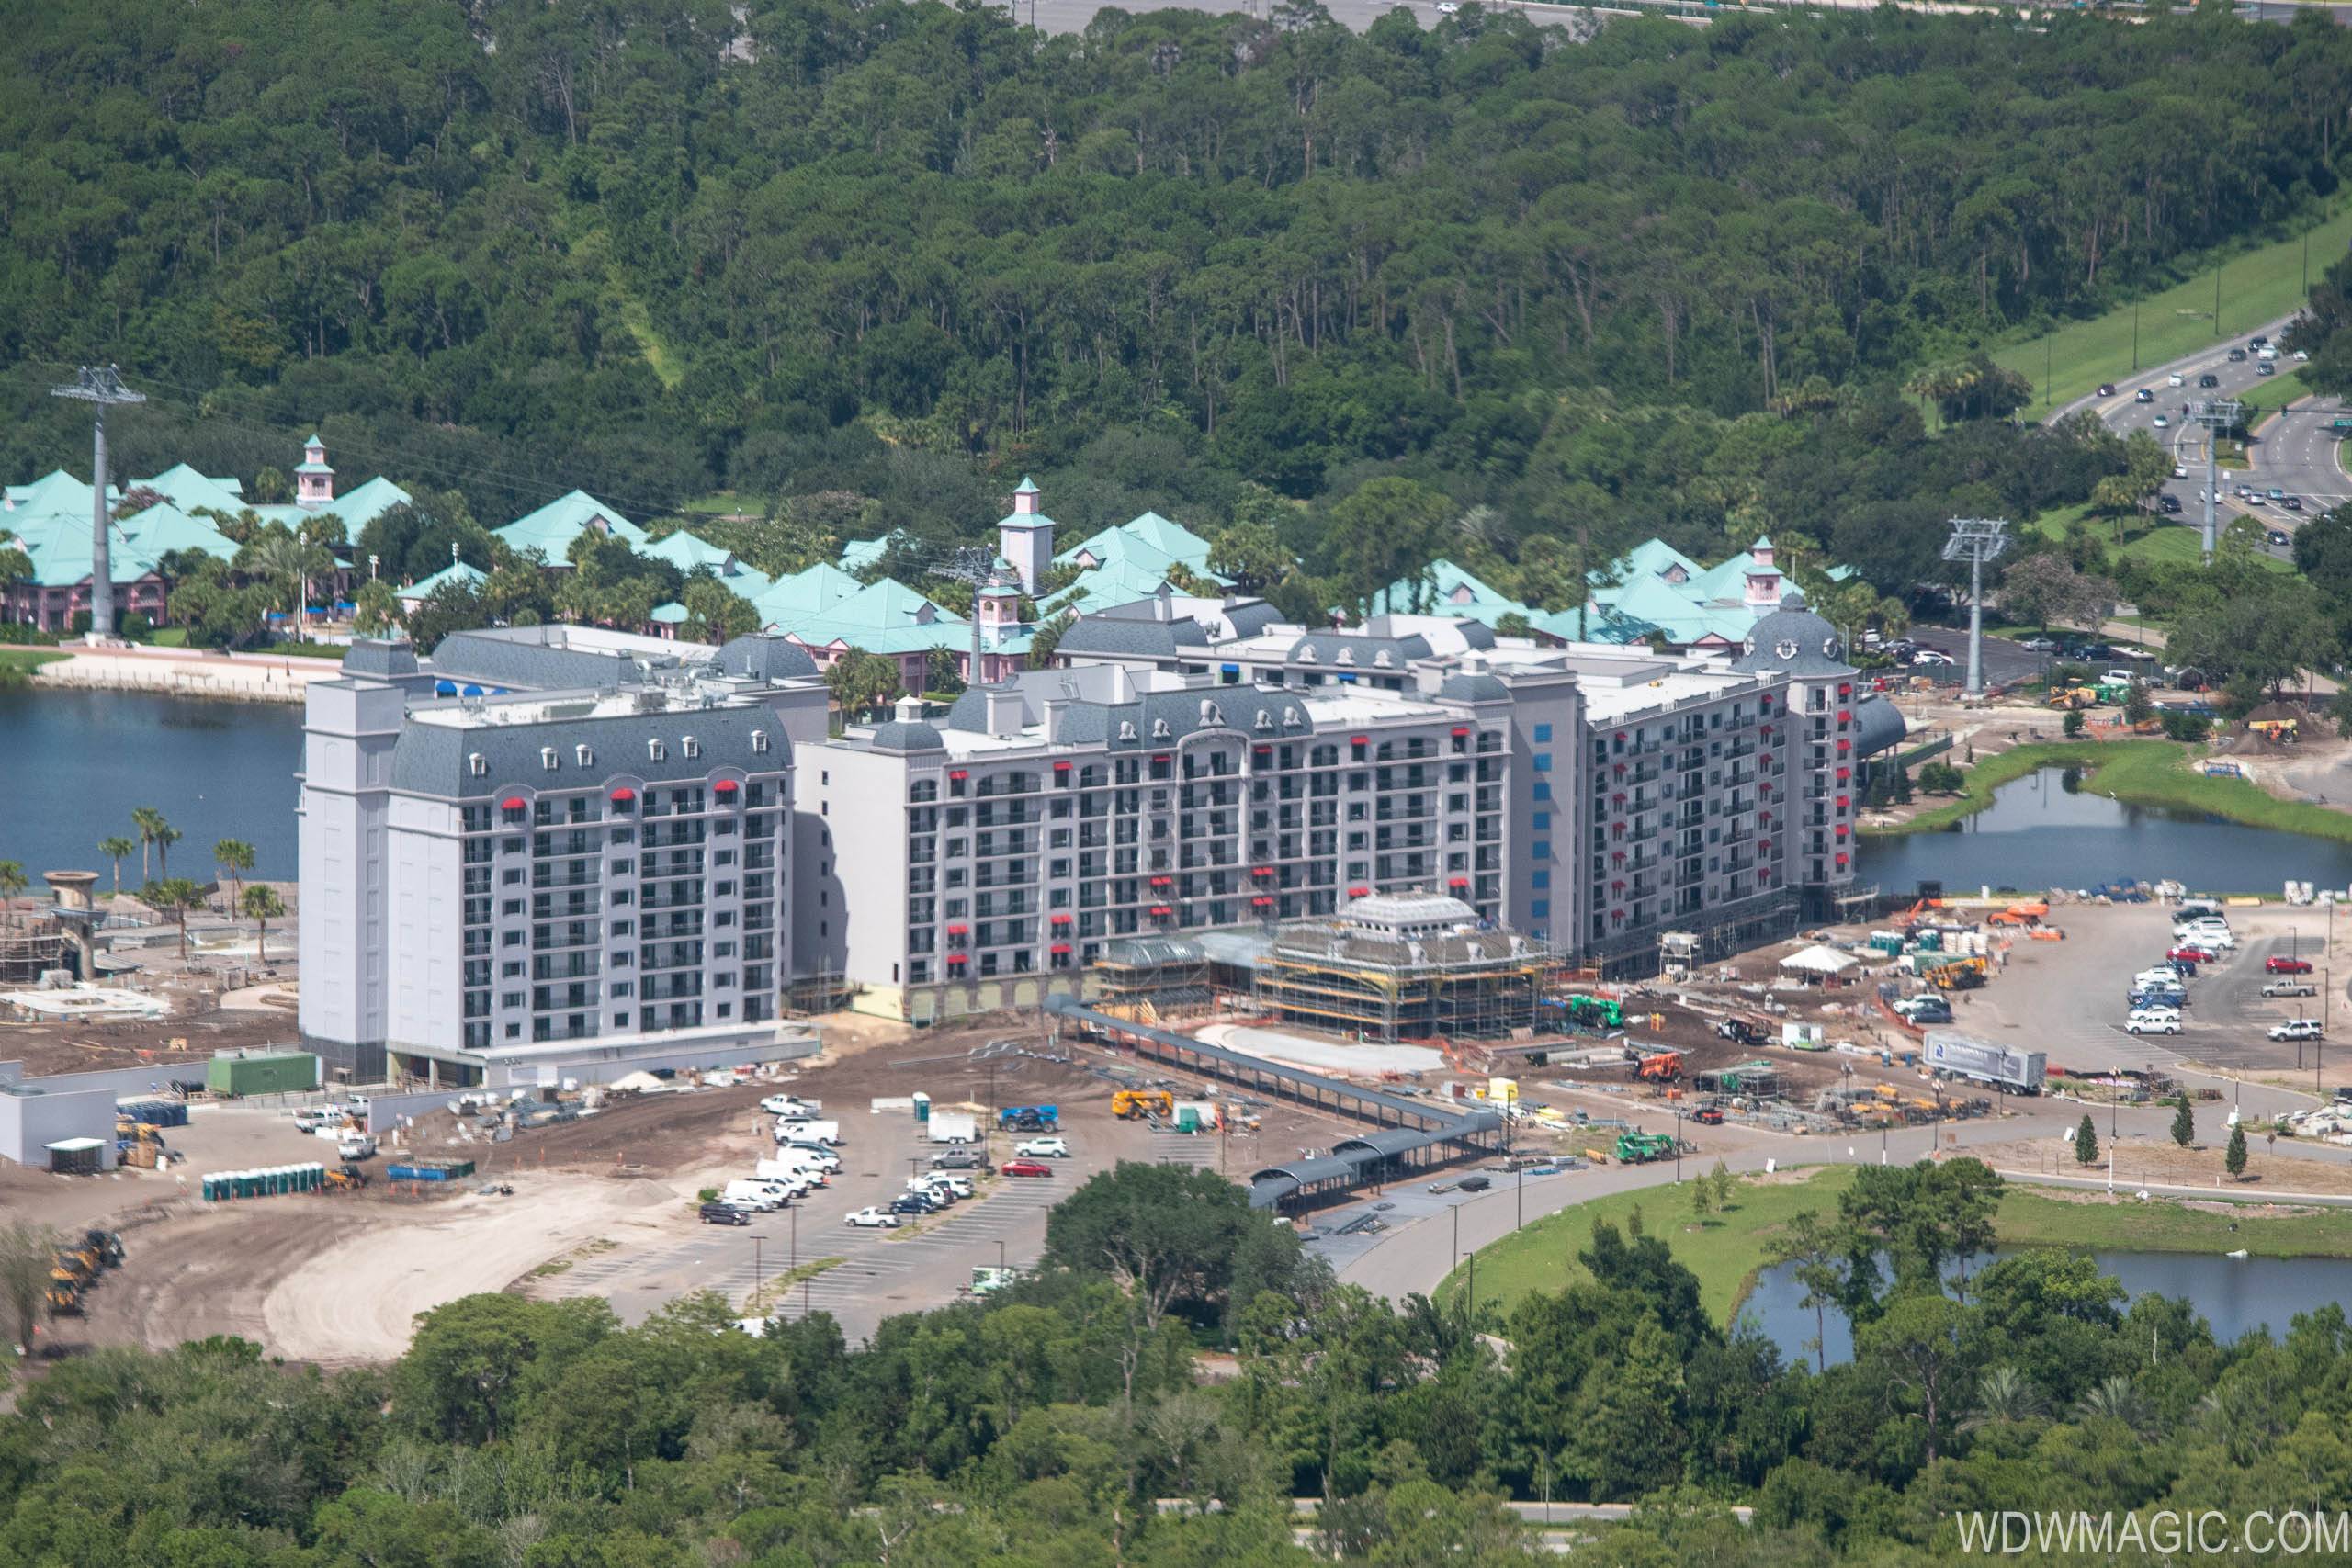 Disney Riviera construction from the air - July 2019